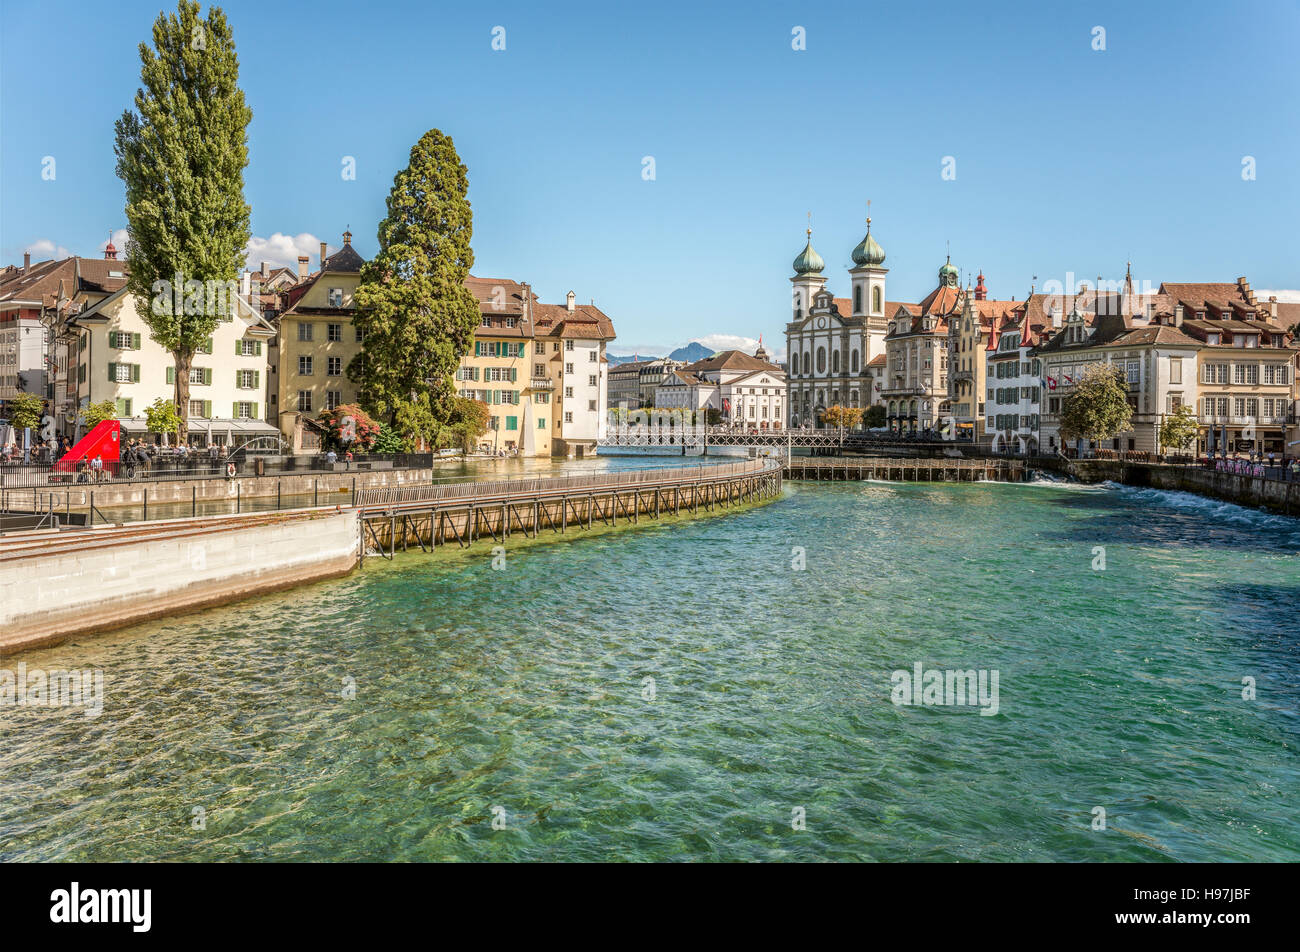 Reuss River inside the old town of Lucerne, Switzerland Stock Photo